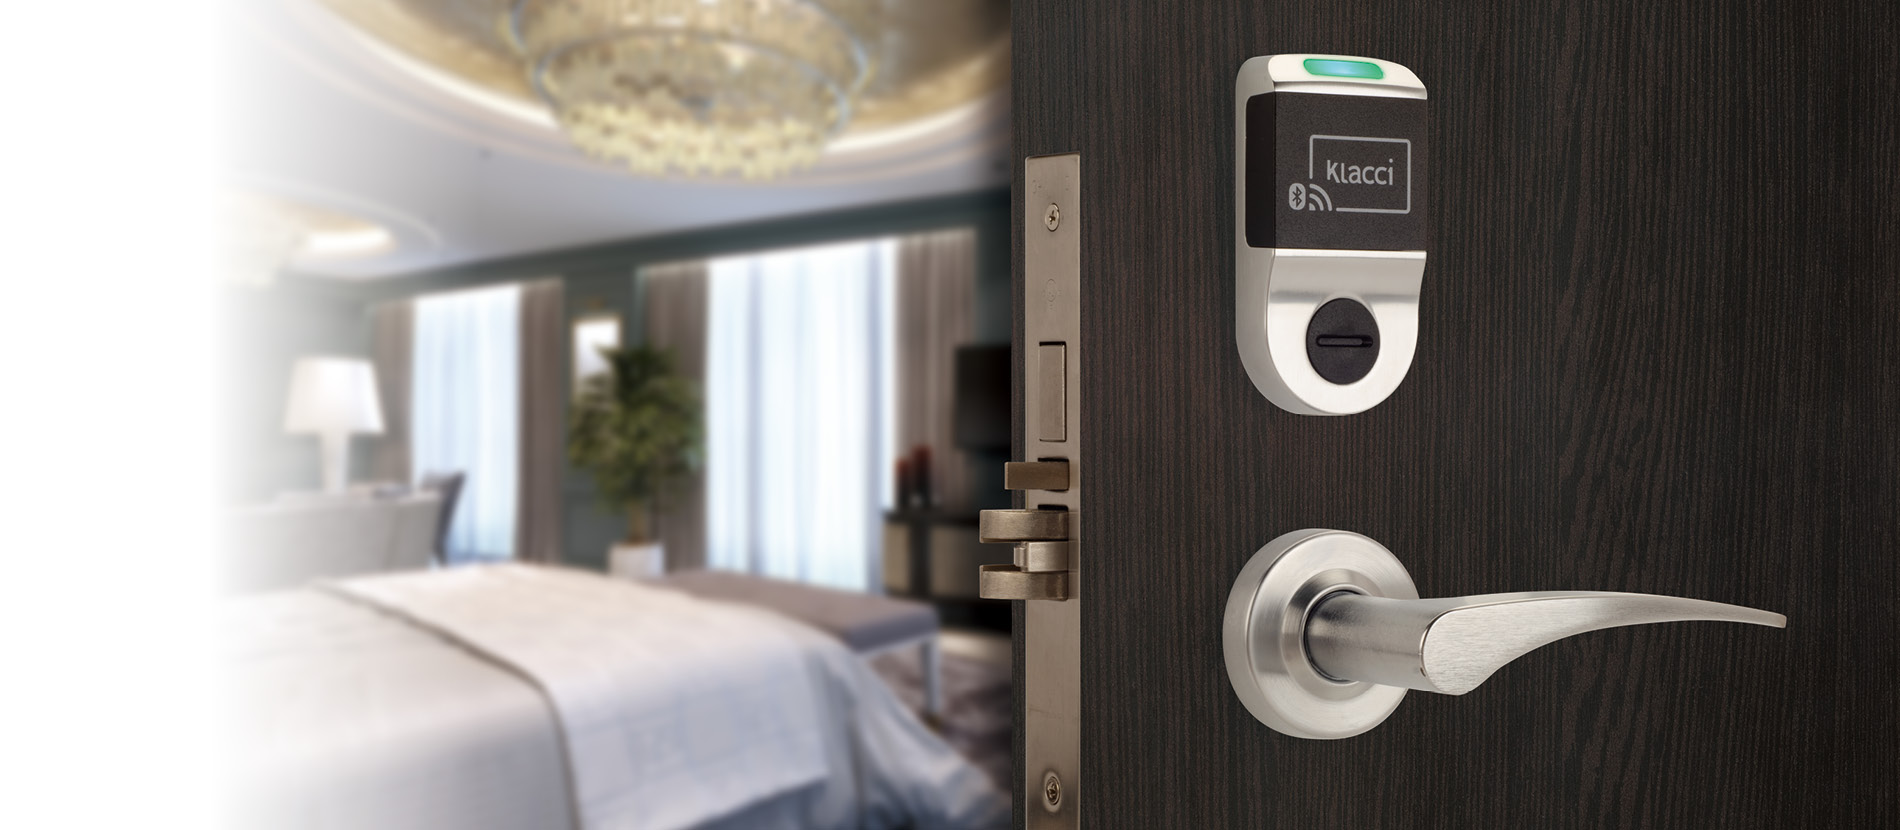 Klacci iF+ Series Bi-System Touchless Smart Lock iF+-94 Mortise Lock hotel